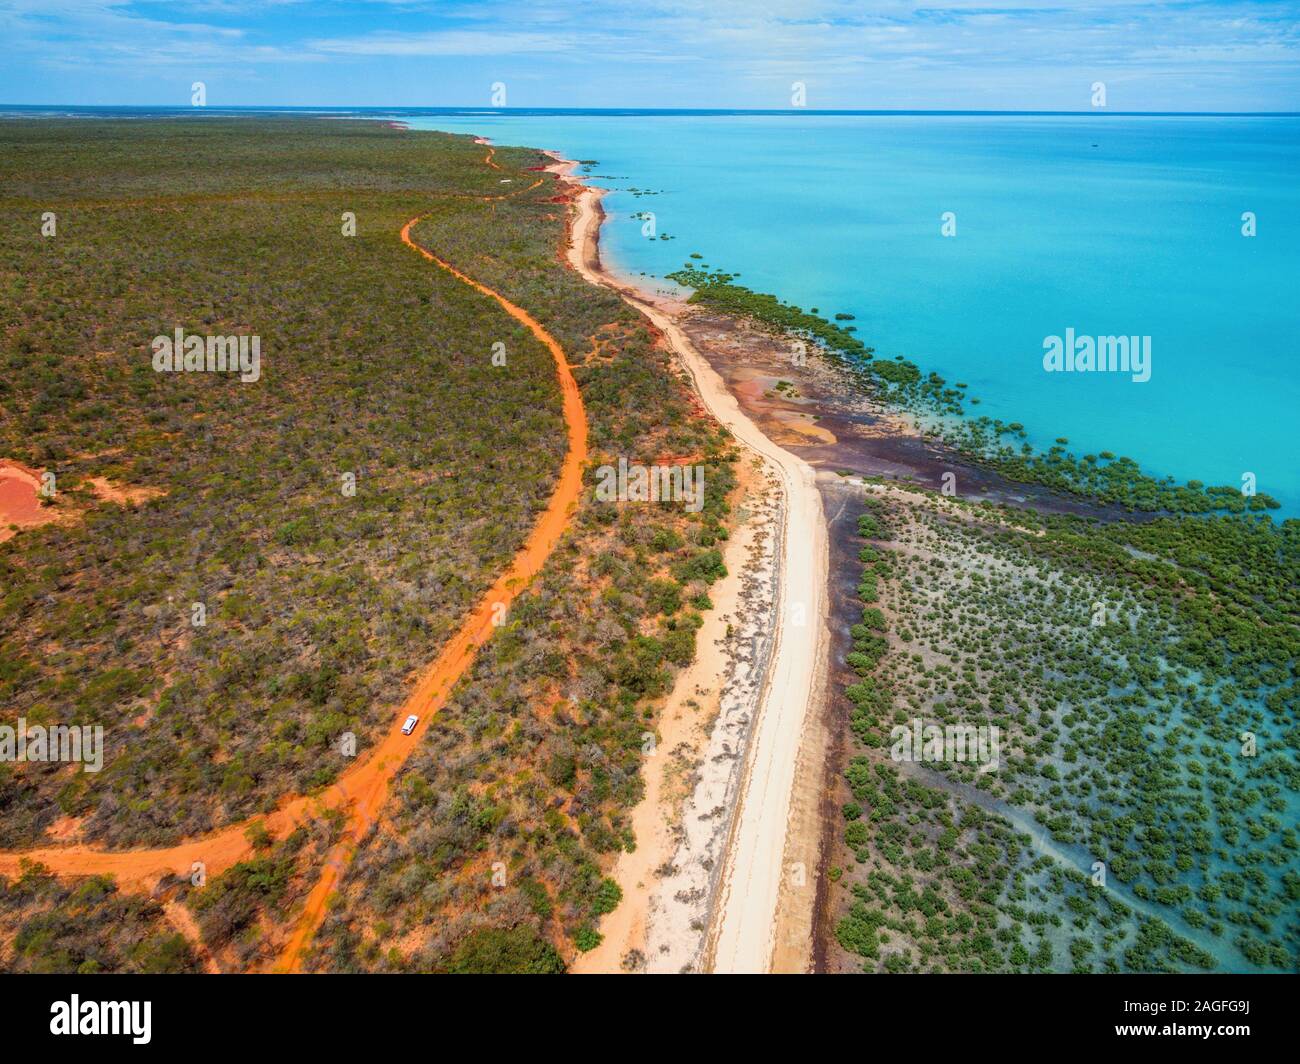 Aerial view of earth textures, road and ocean, Western Australia, Francois Peron Stock Photo